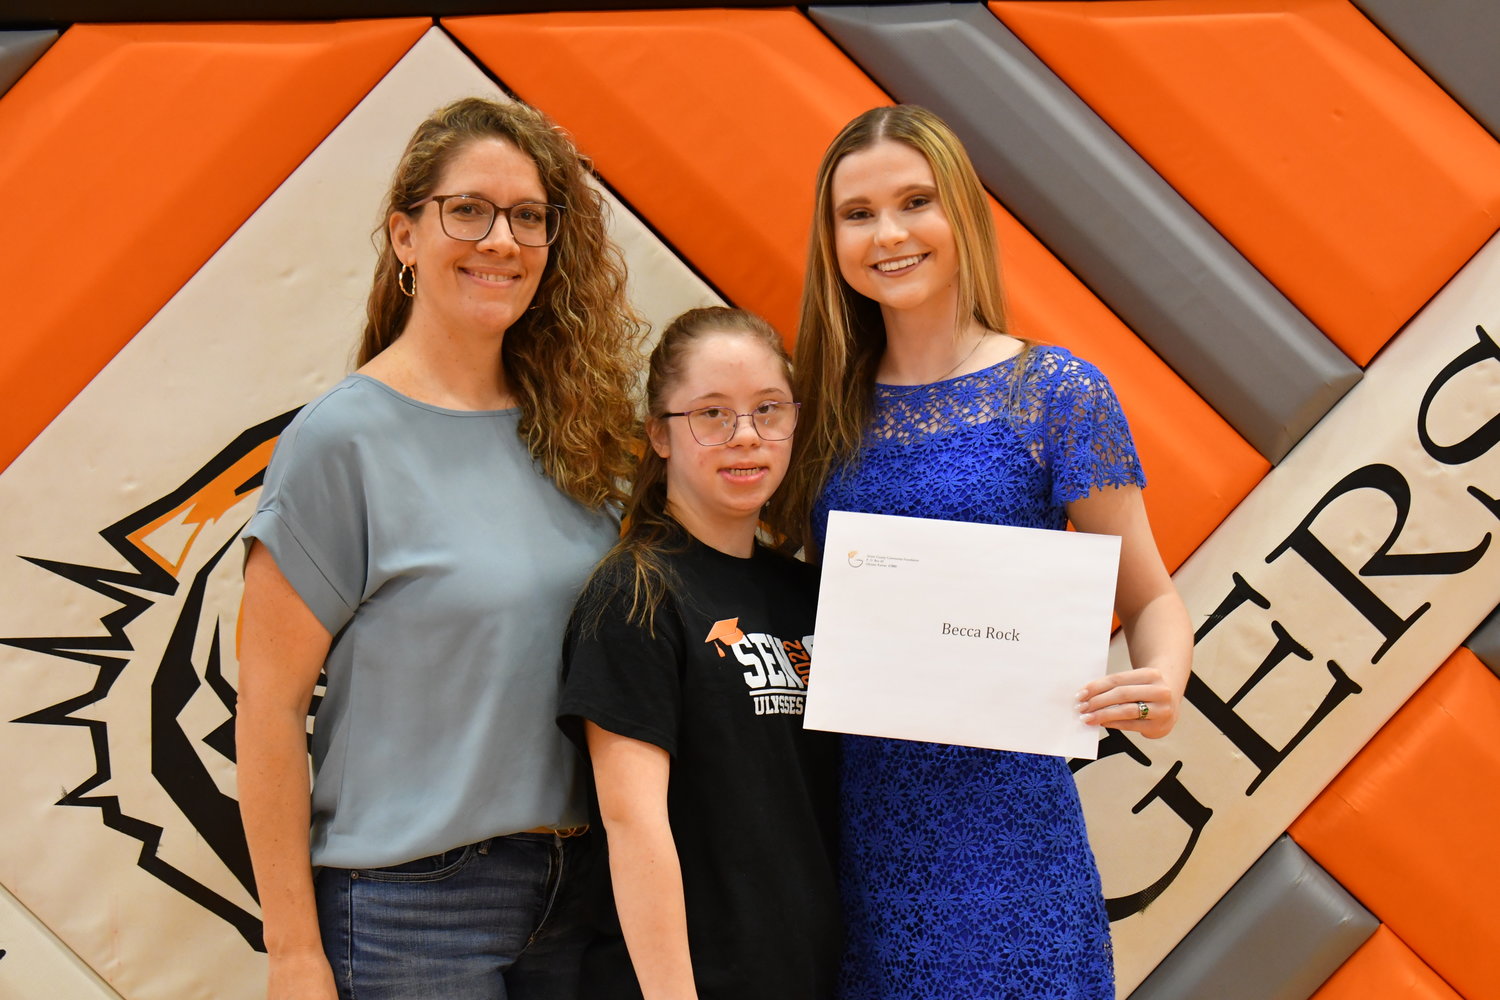 Senior Awards — Becca Rock was given the Katie Bug's Go the Distance Scholarship by Cindy Warner and Katie McElroy on Friday, May 13, 2022.